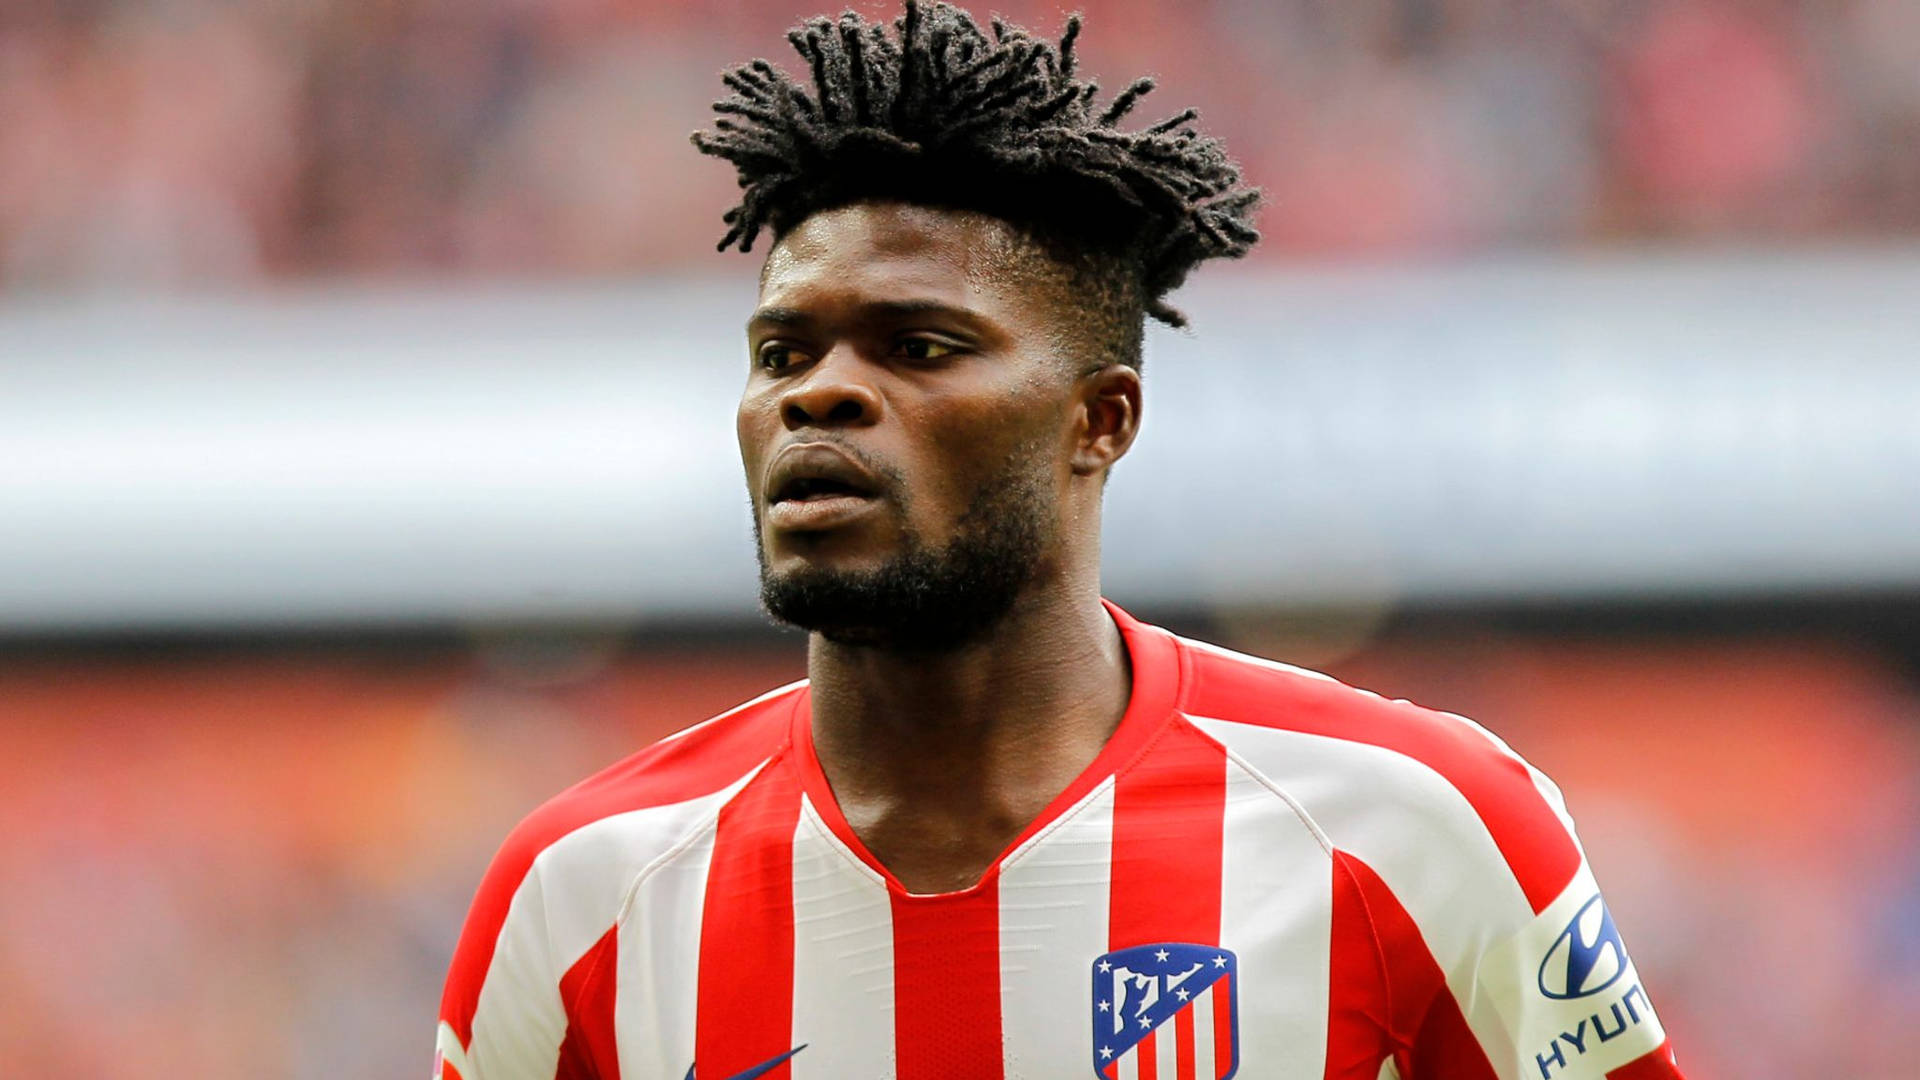 Thomas Partey Looking To The Left Wallpaper